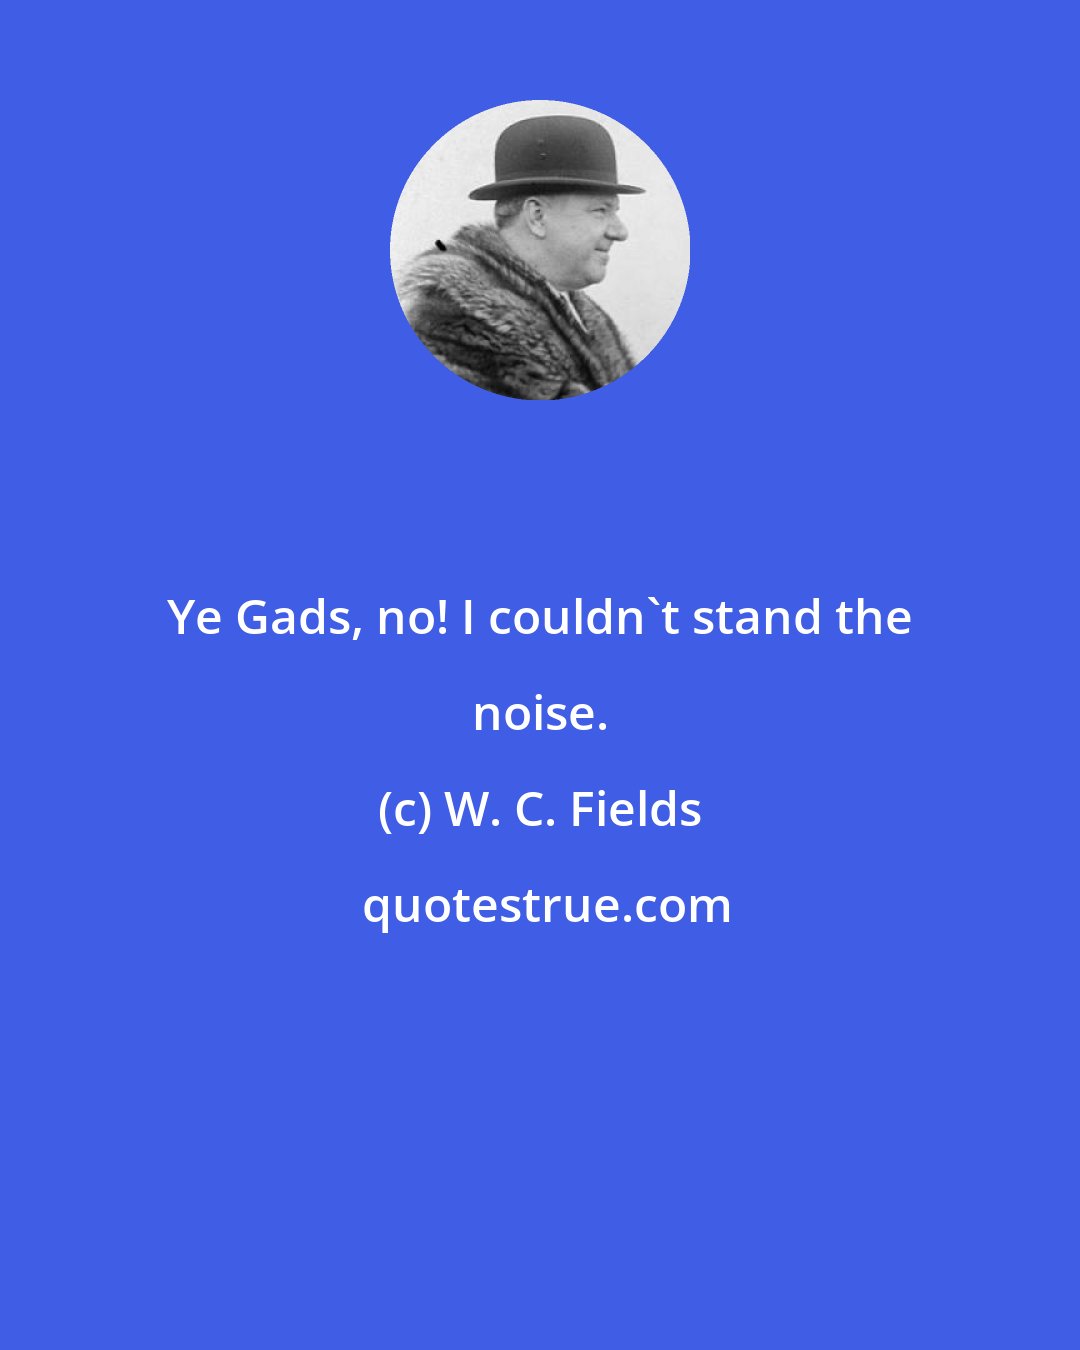 W. C. Fields: Ye Gads, no! I couldn't stand the noise.